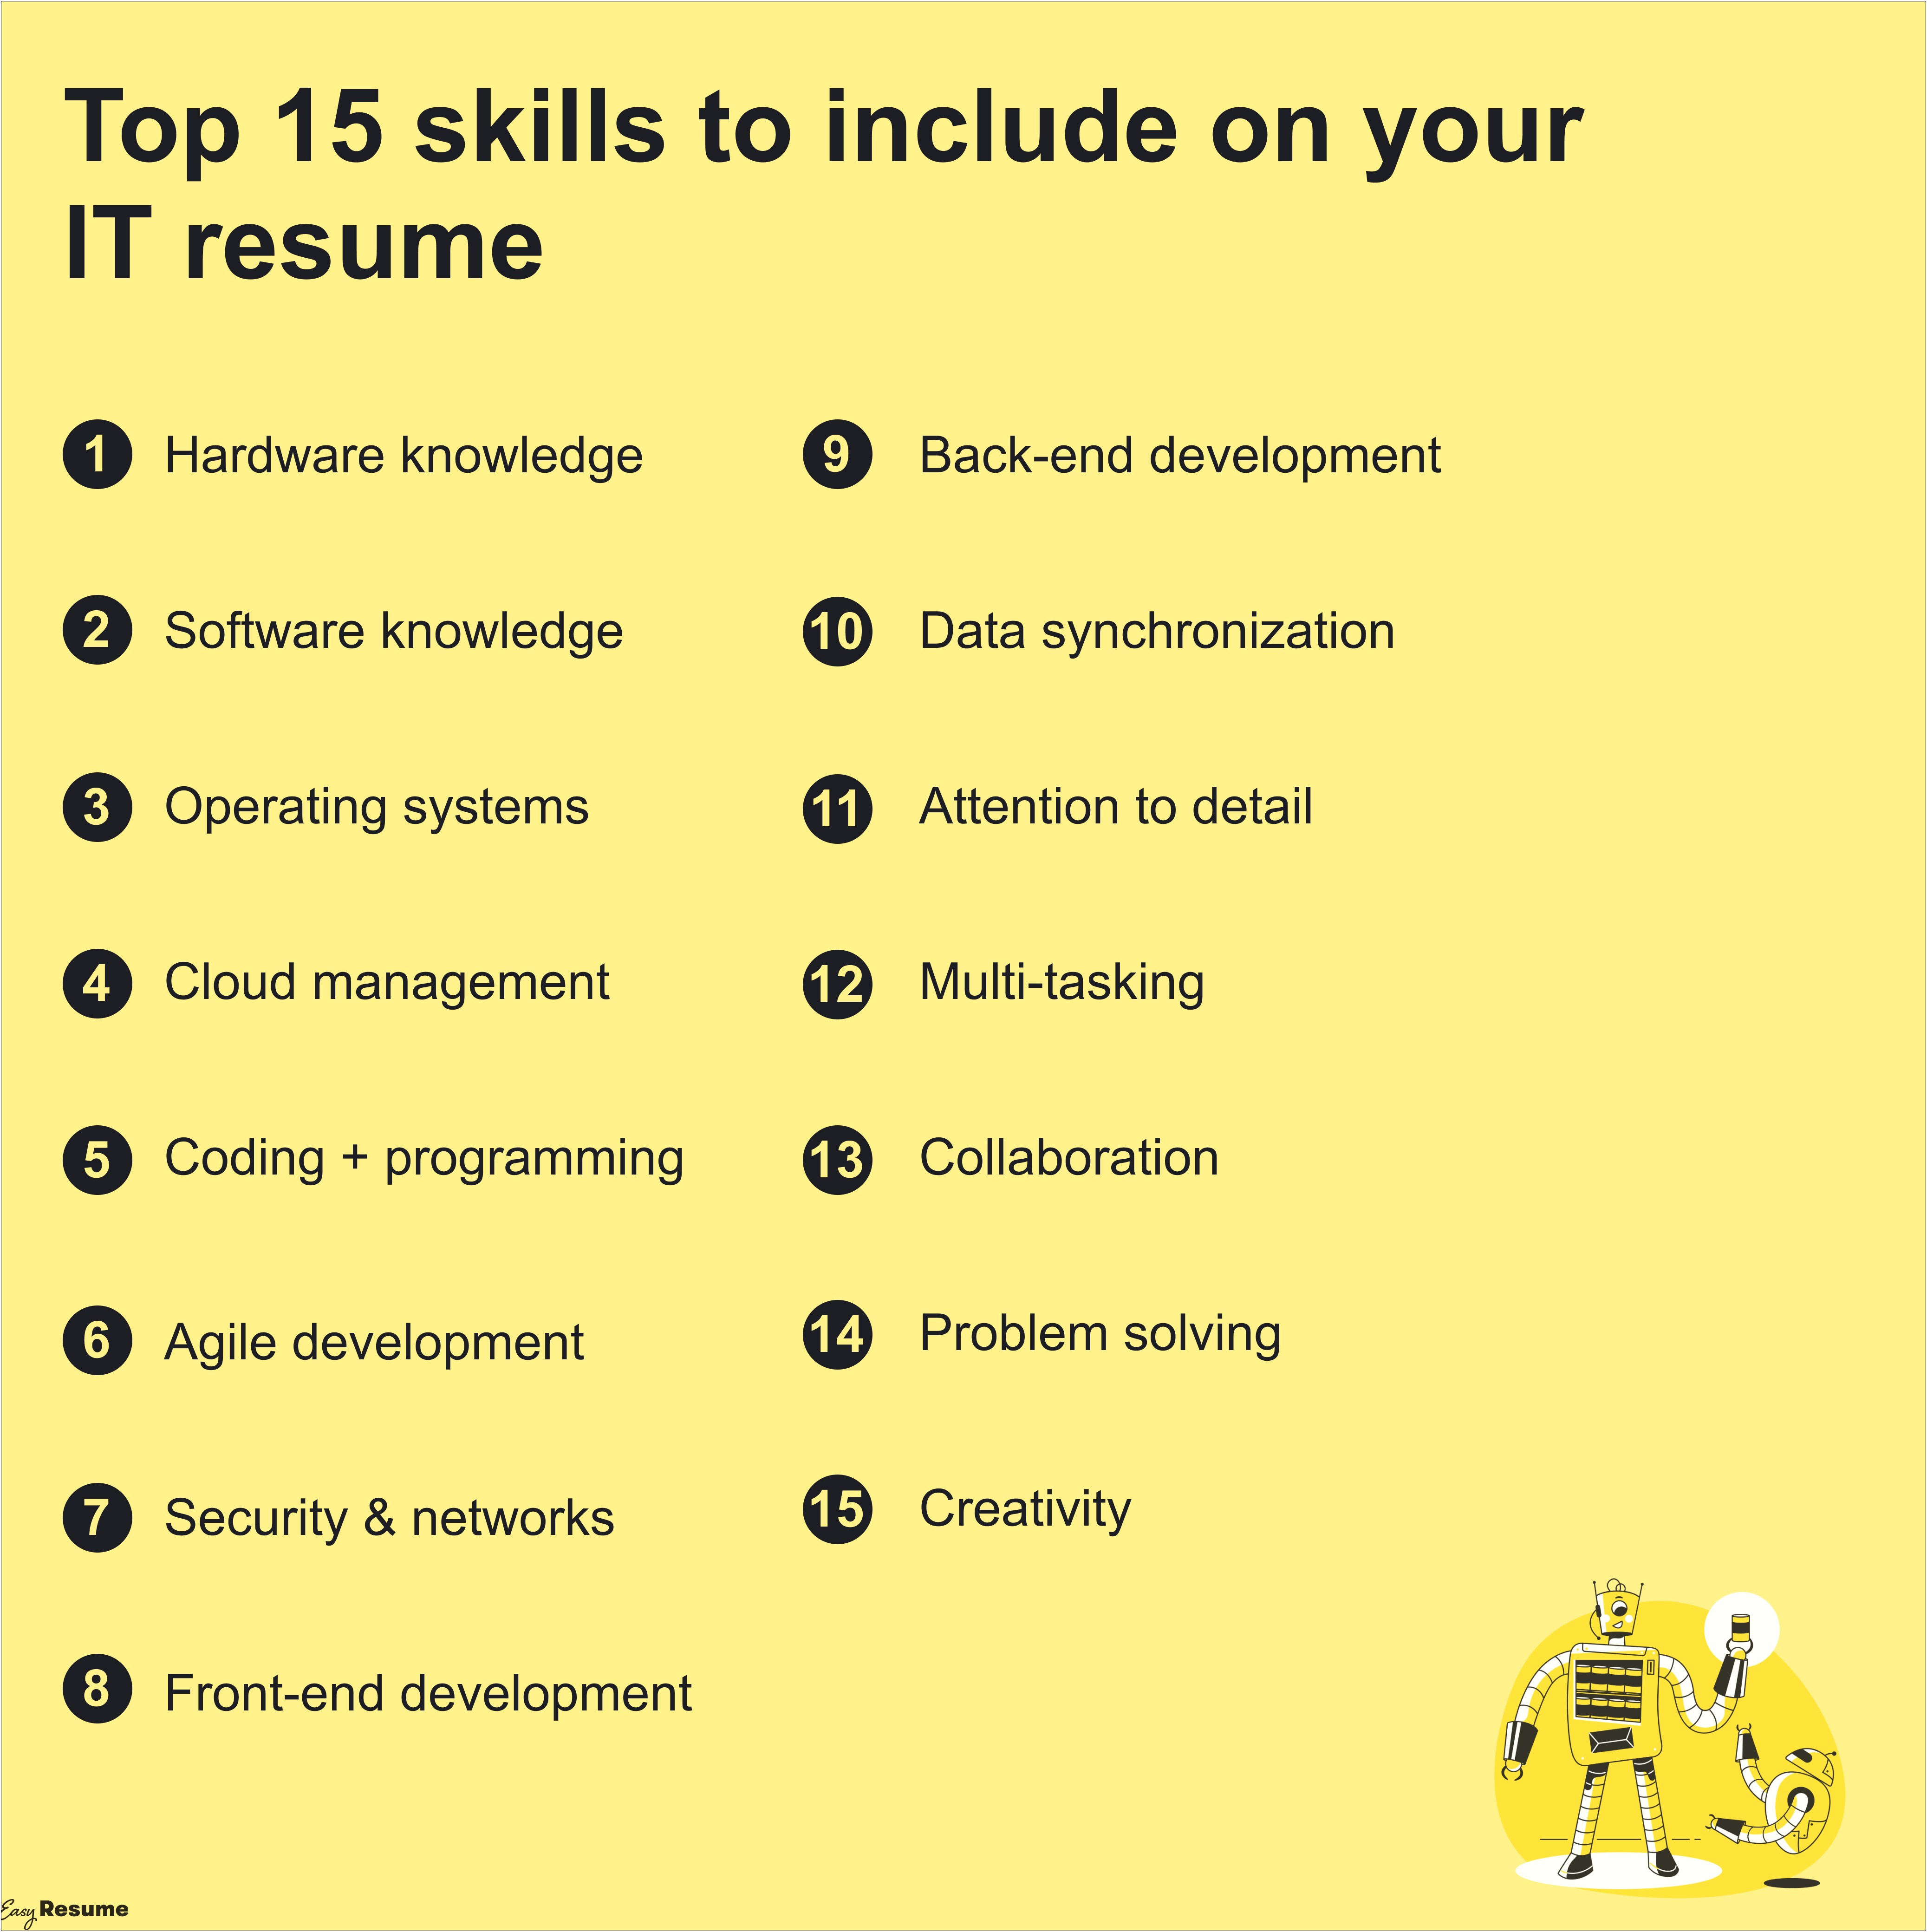 Skills That Are Appropriate For An It Resume